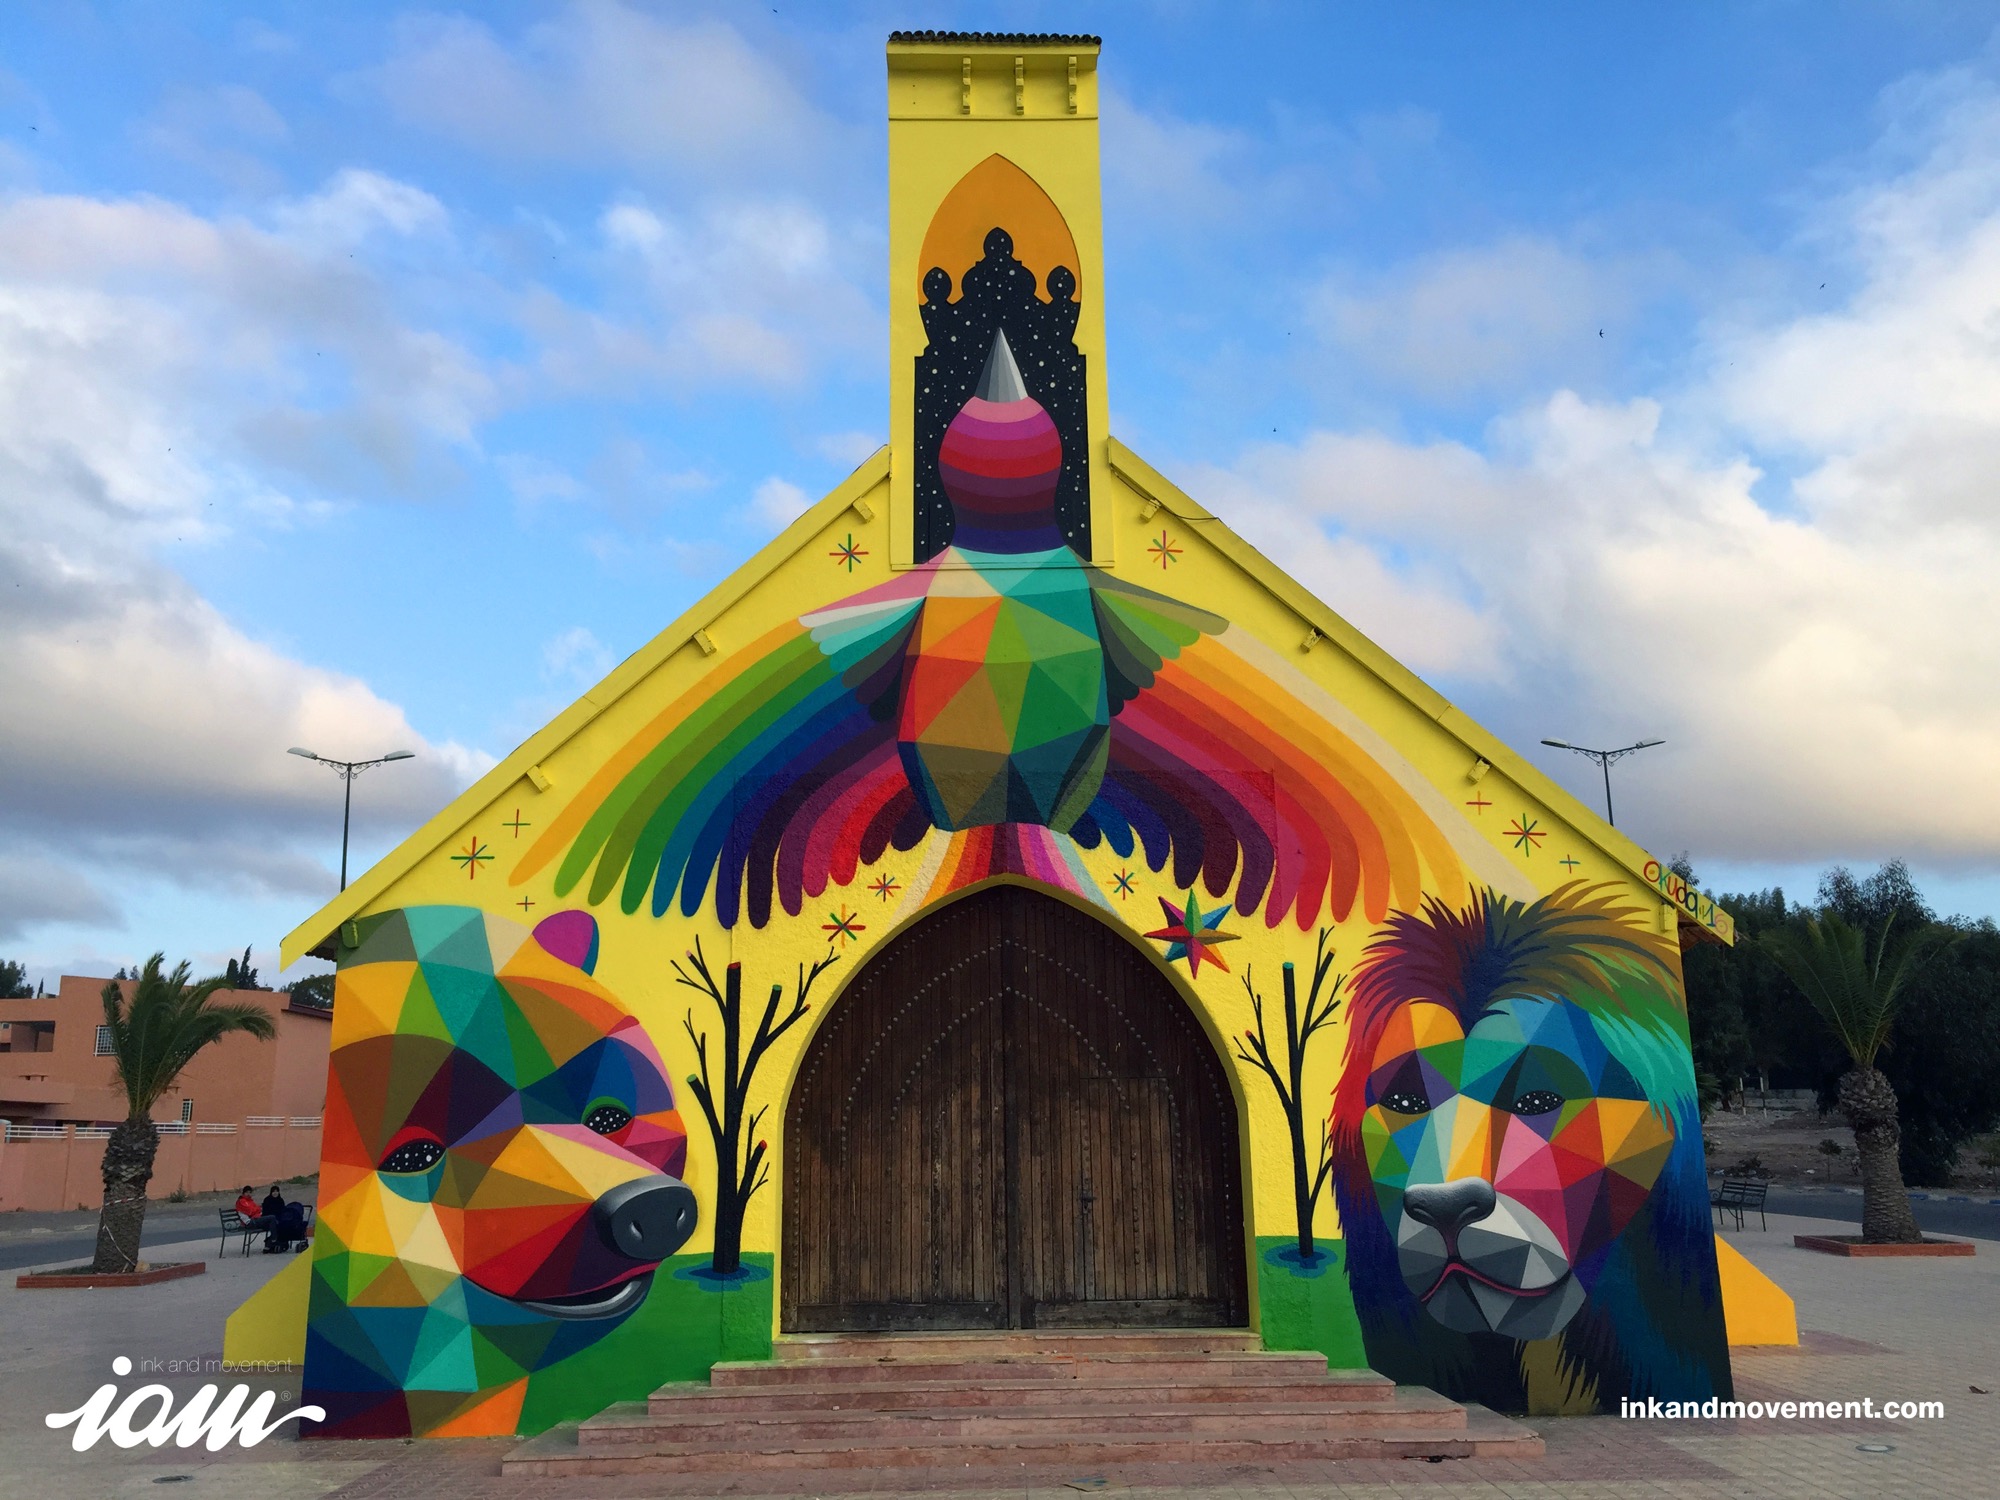 “11 Mirages to the Freedom” by Okuda in Youssoufia, Morocco - the vandallist (1)